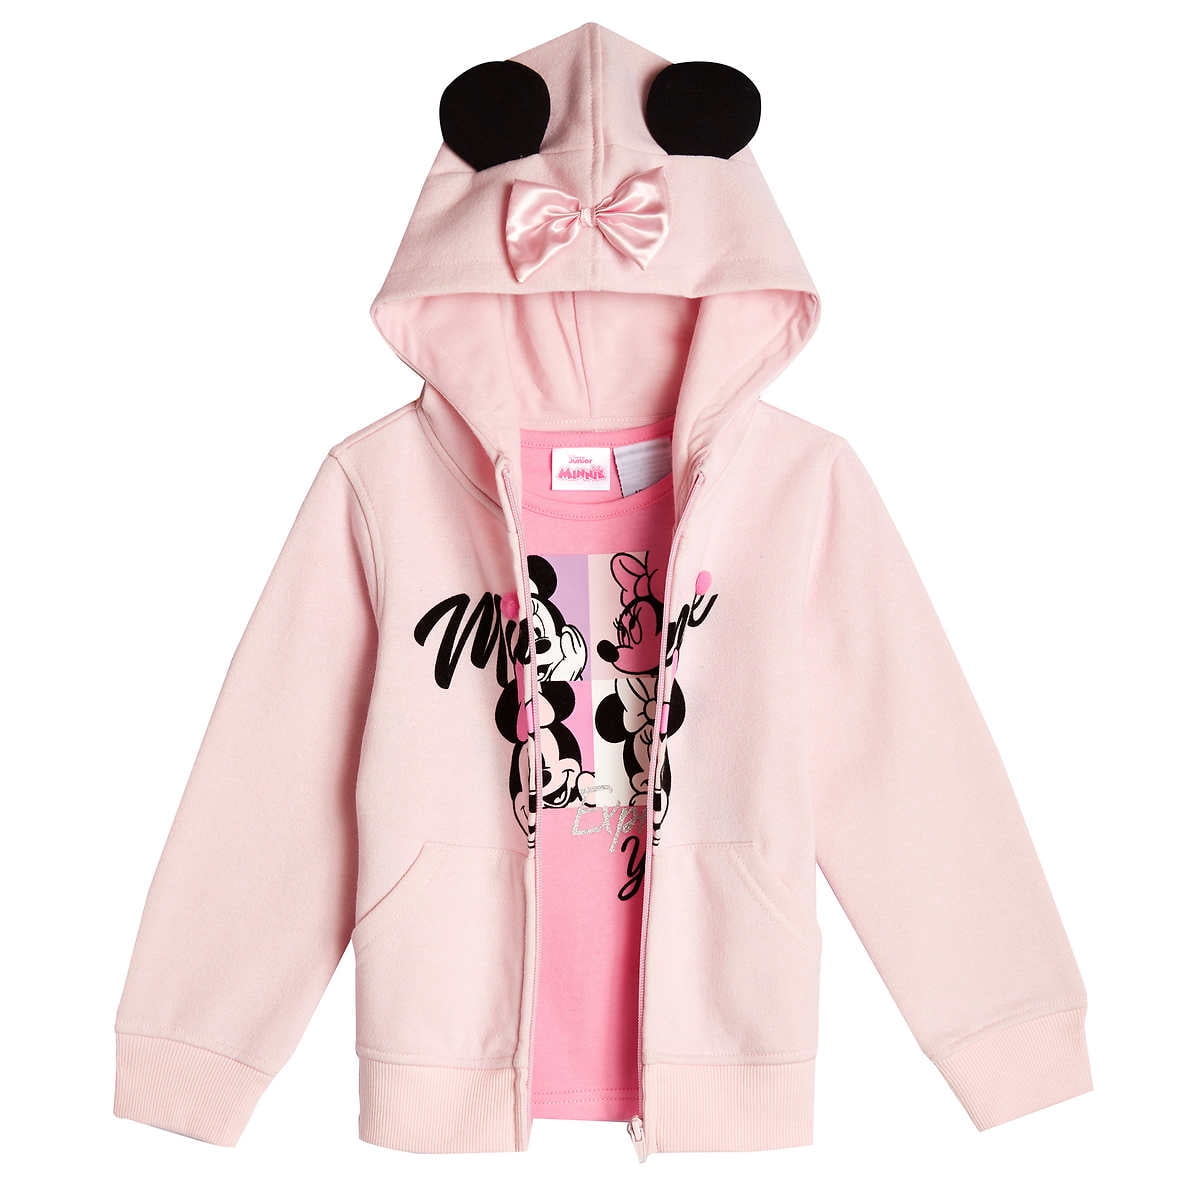 Minnie Mouse Girls T-Shirt Hoodie Activewear Zip up 2 PC Outfit Set WarnerBros Sizes 3T-7